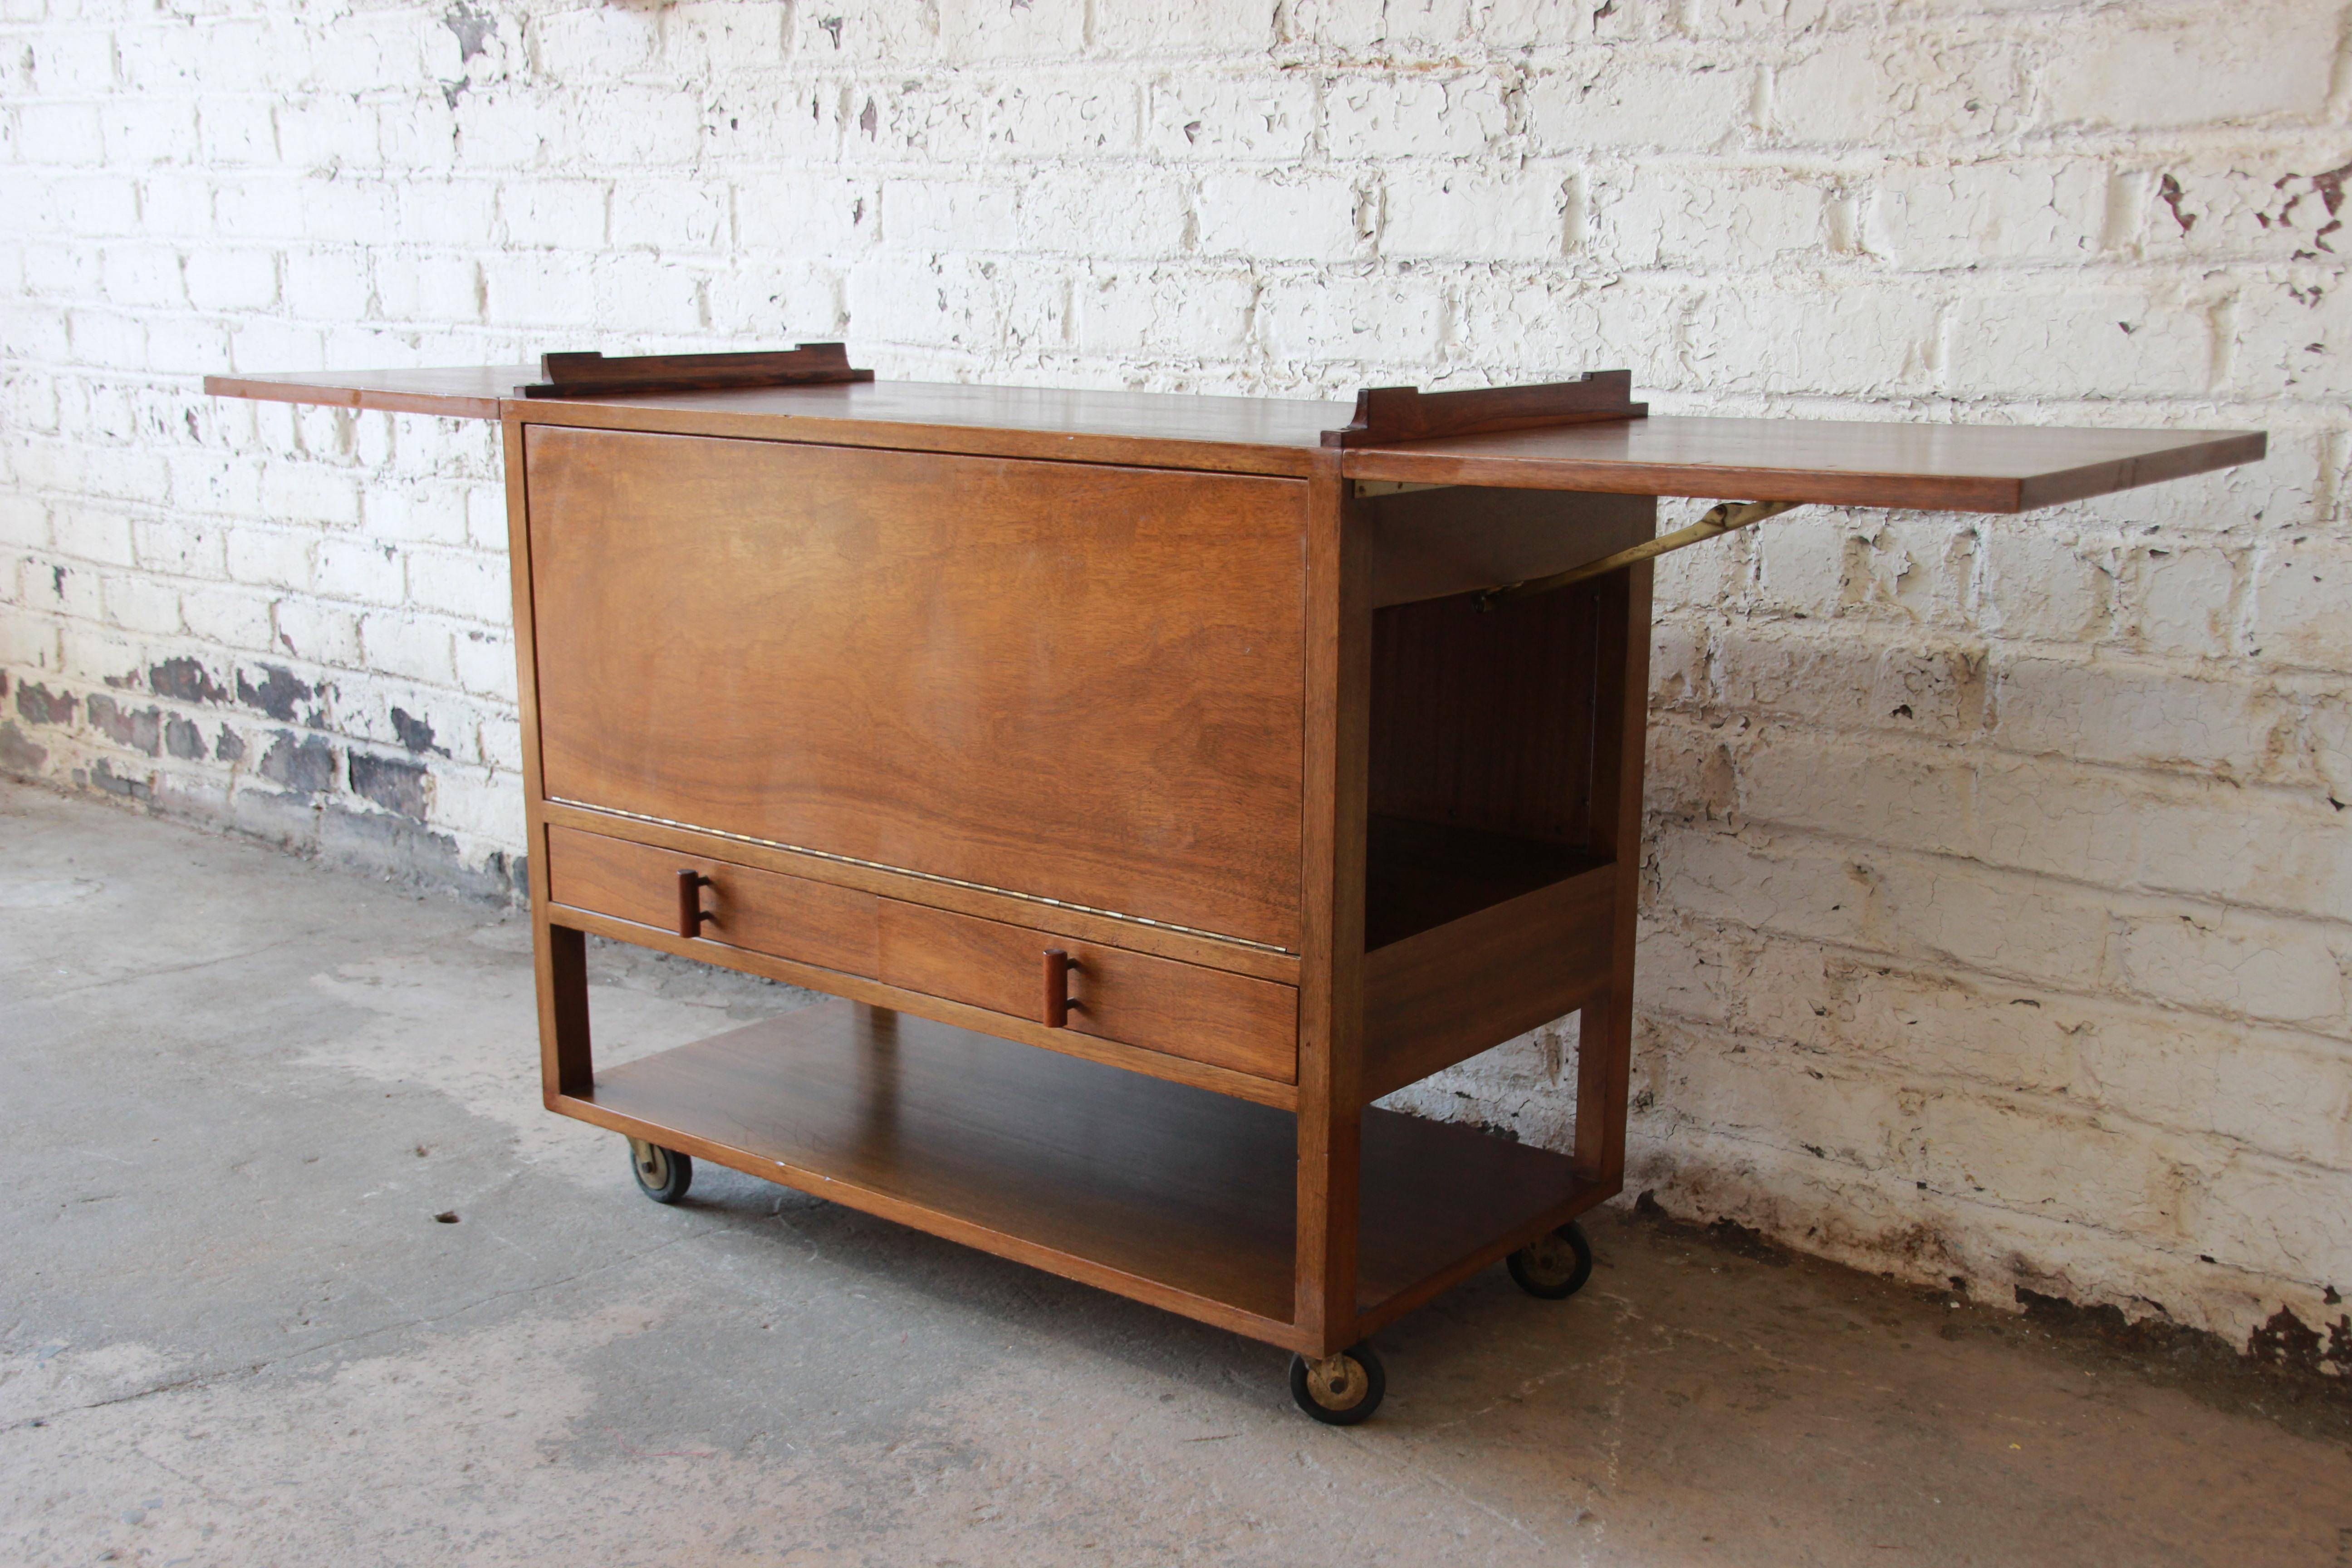 Offering a very nice Mid-Century Modern rolling bar cart by Wormley for Dunbar. The bar features a nicely woven back, two-drawer for storage, a drop-front door that turns into a shelf, and two large leaves. The cart provides lots of room for storage